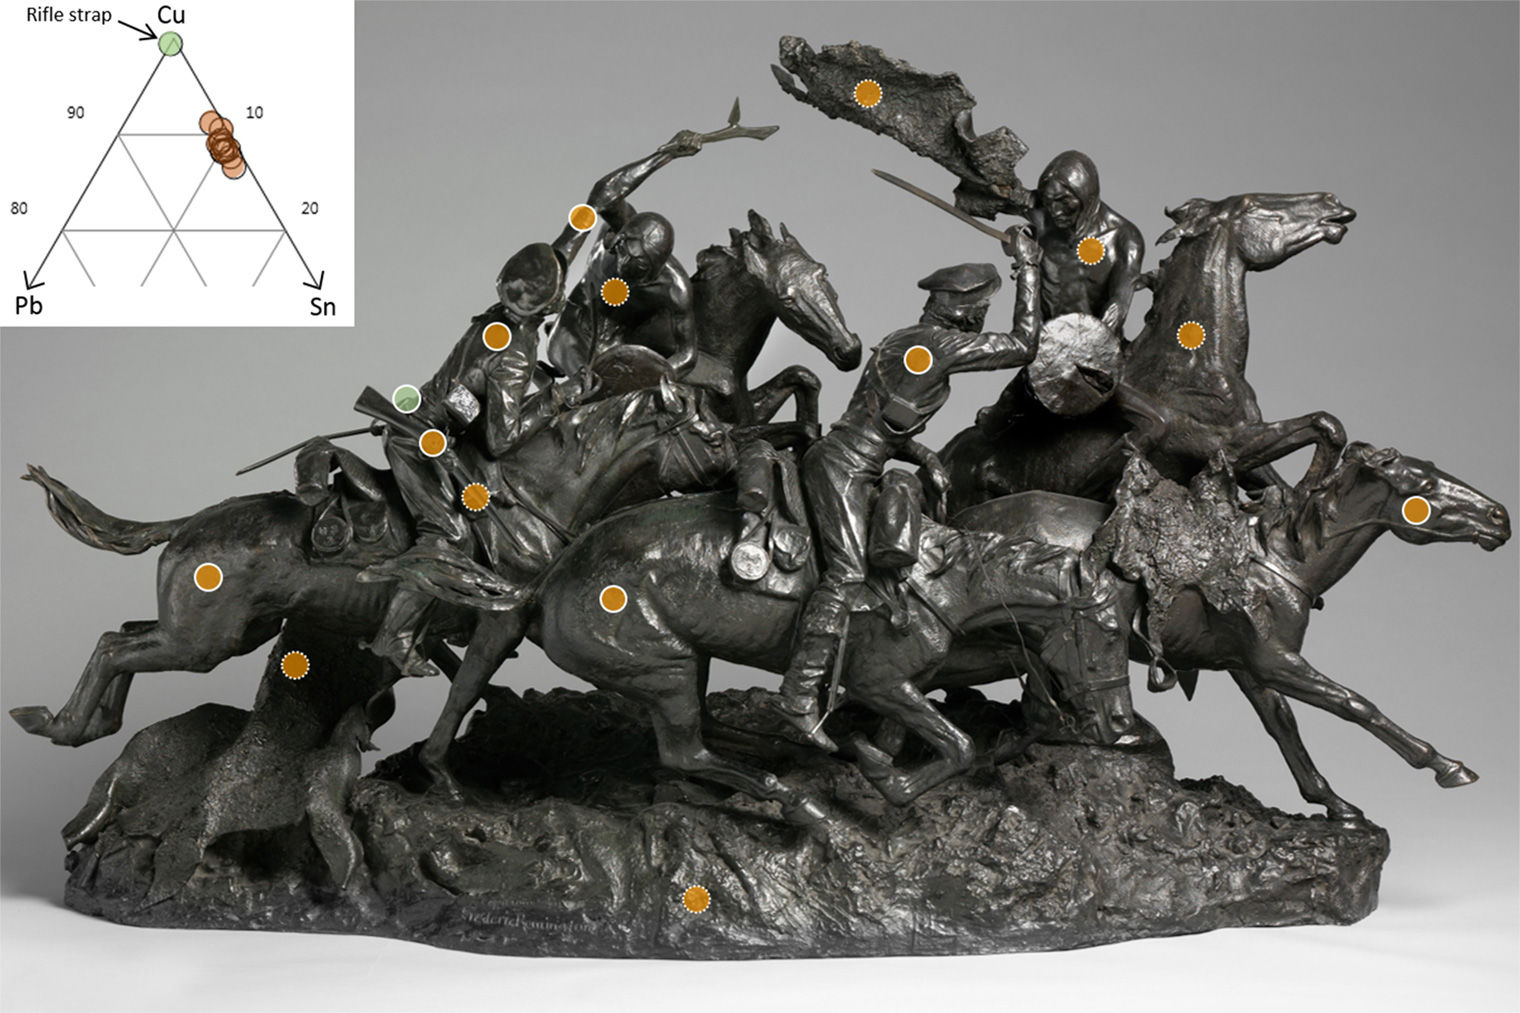 A view of Frederic Remington's Old Dragoons of 1850 with chart overlaid depicting alloy composition